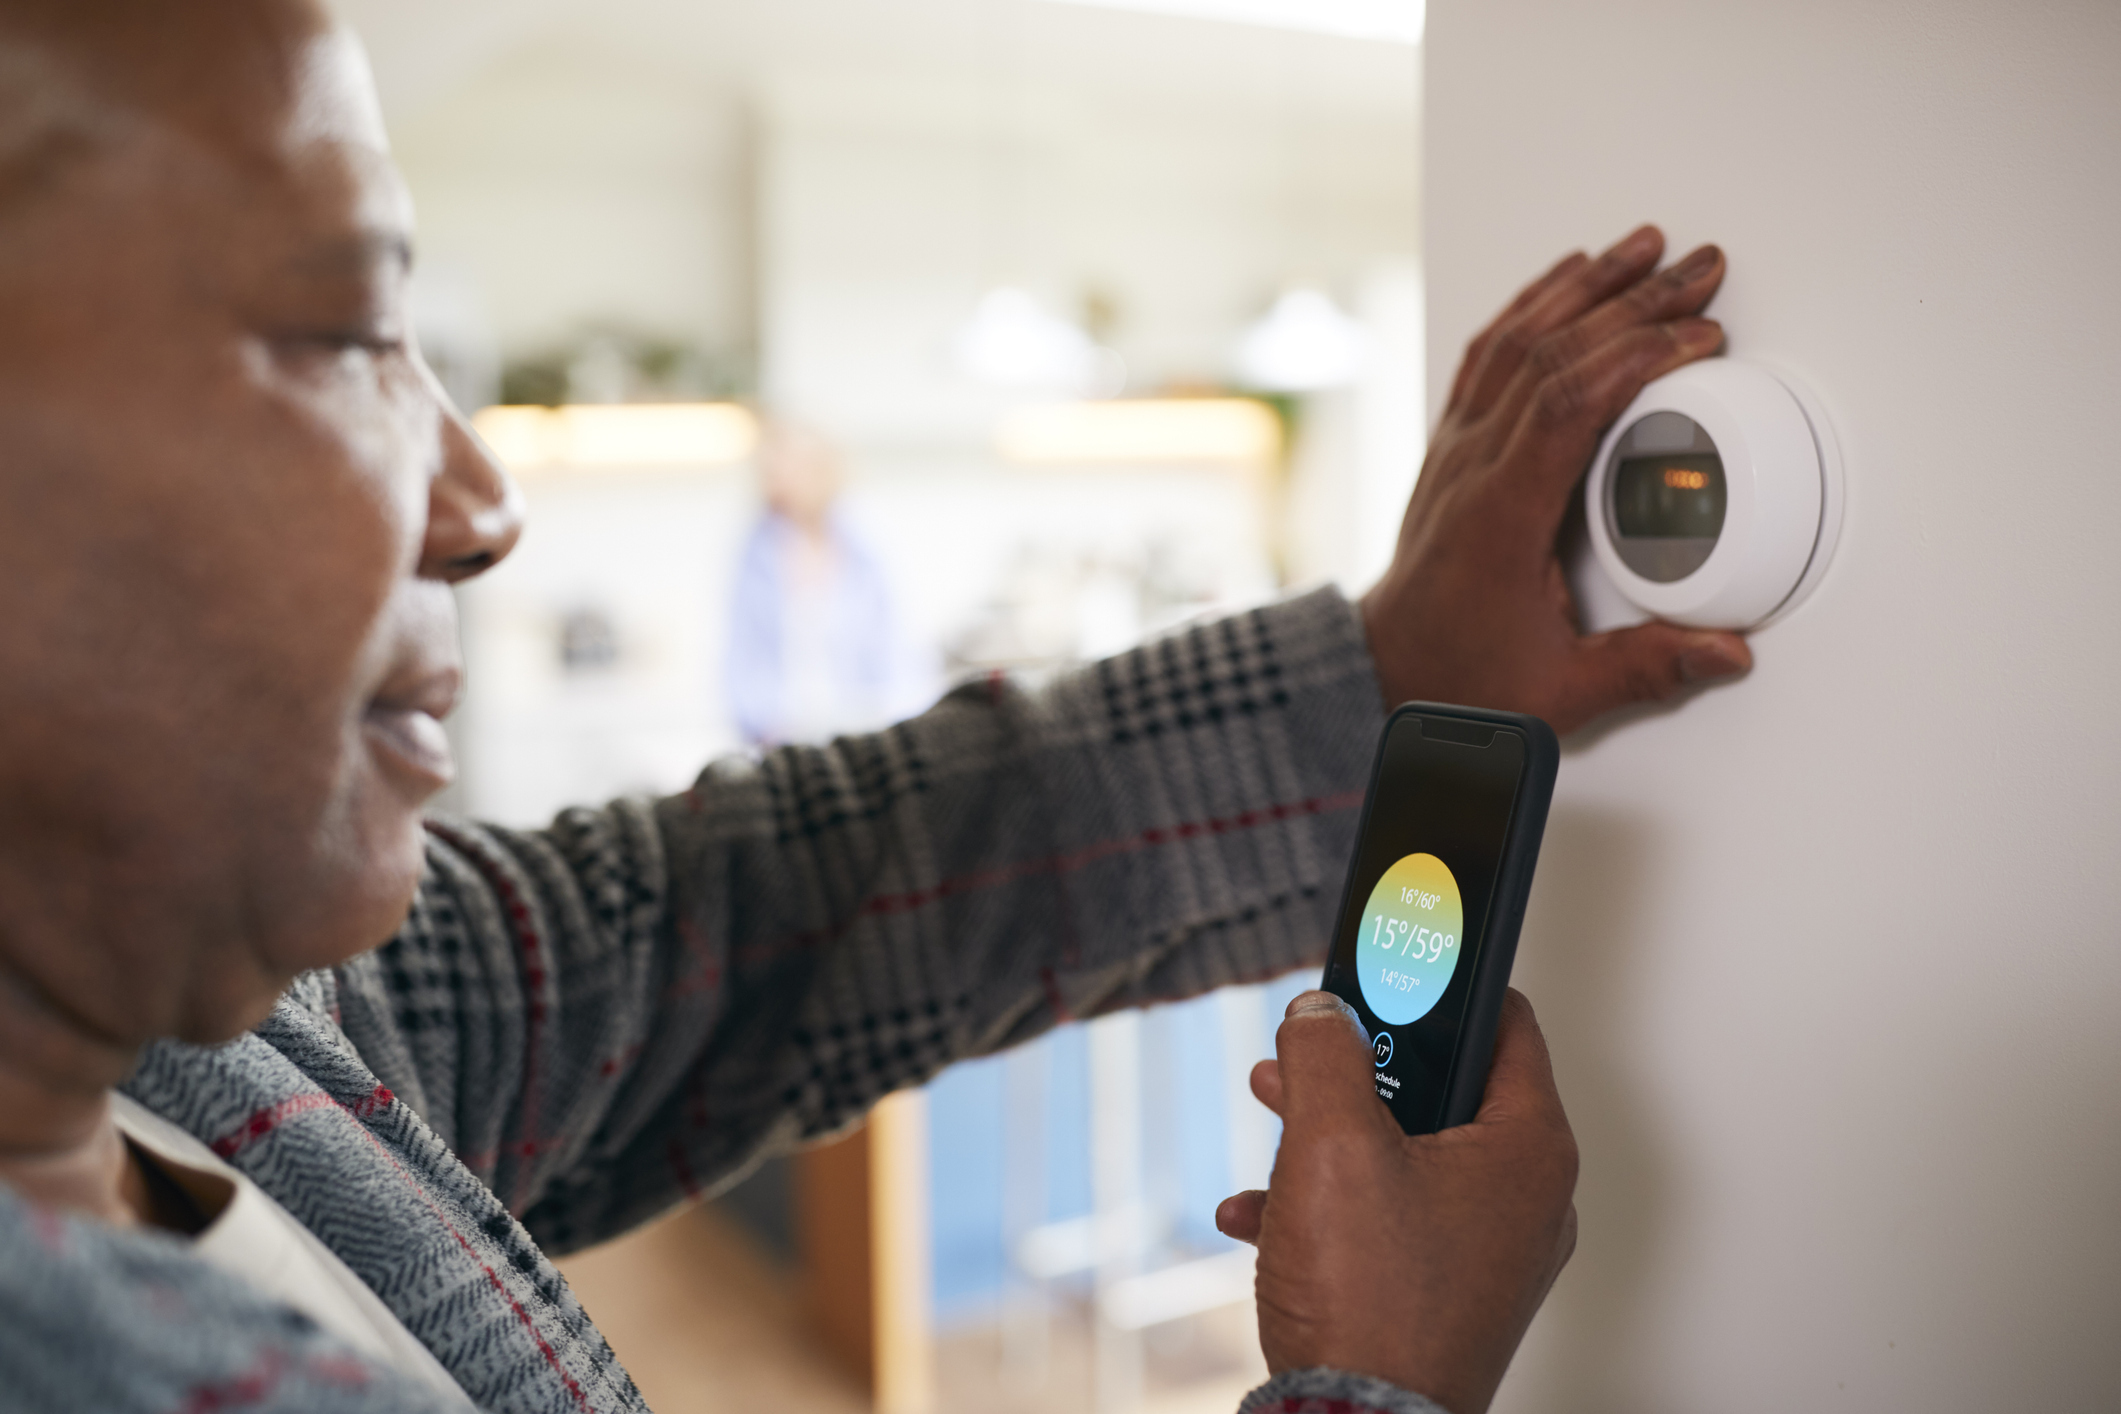 Woman uses app to set thermostat.